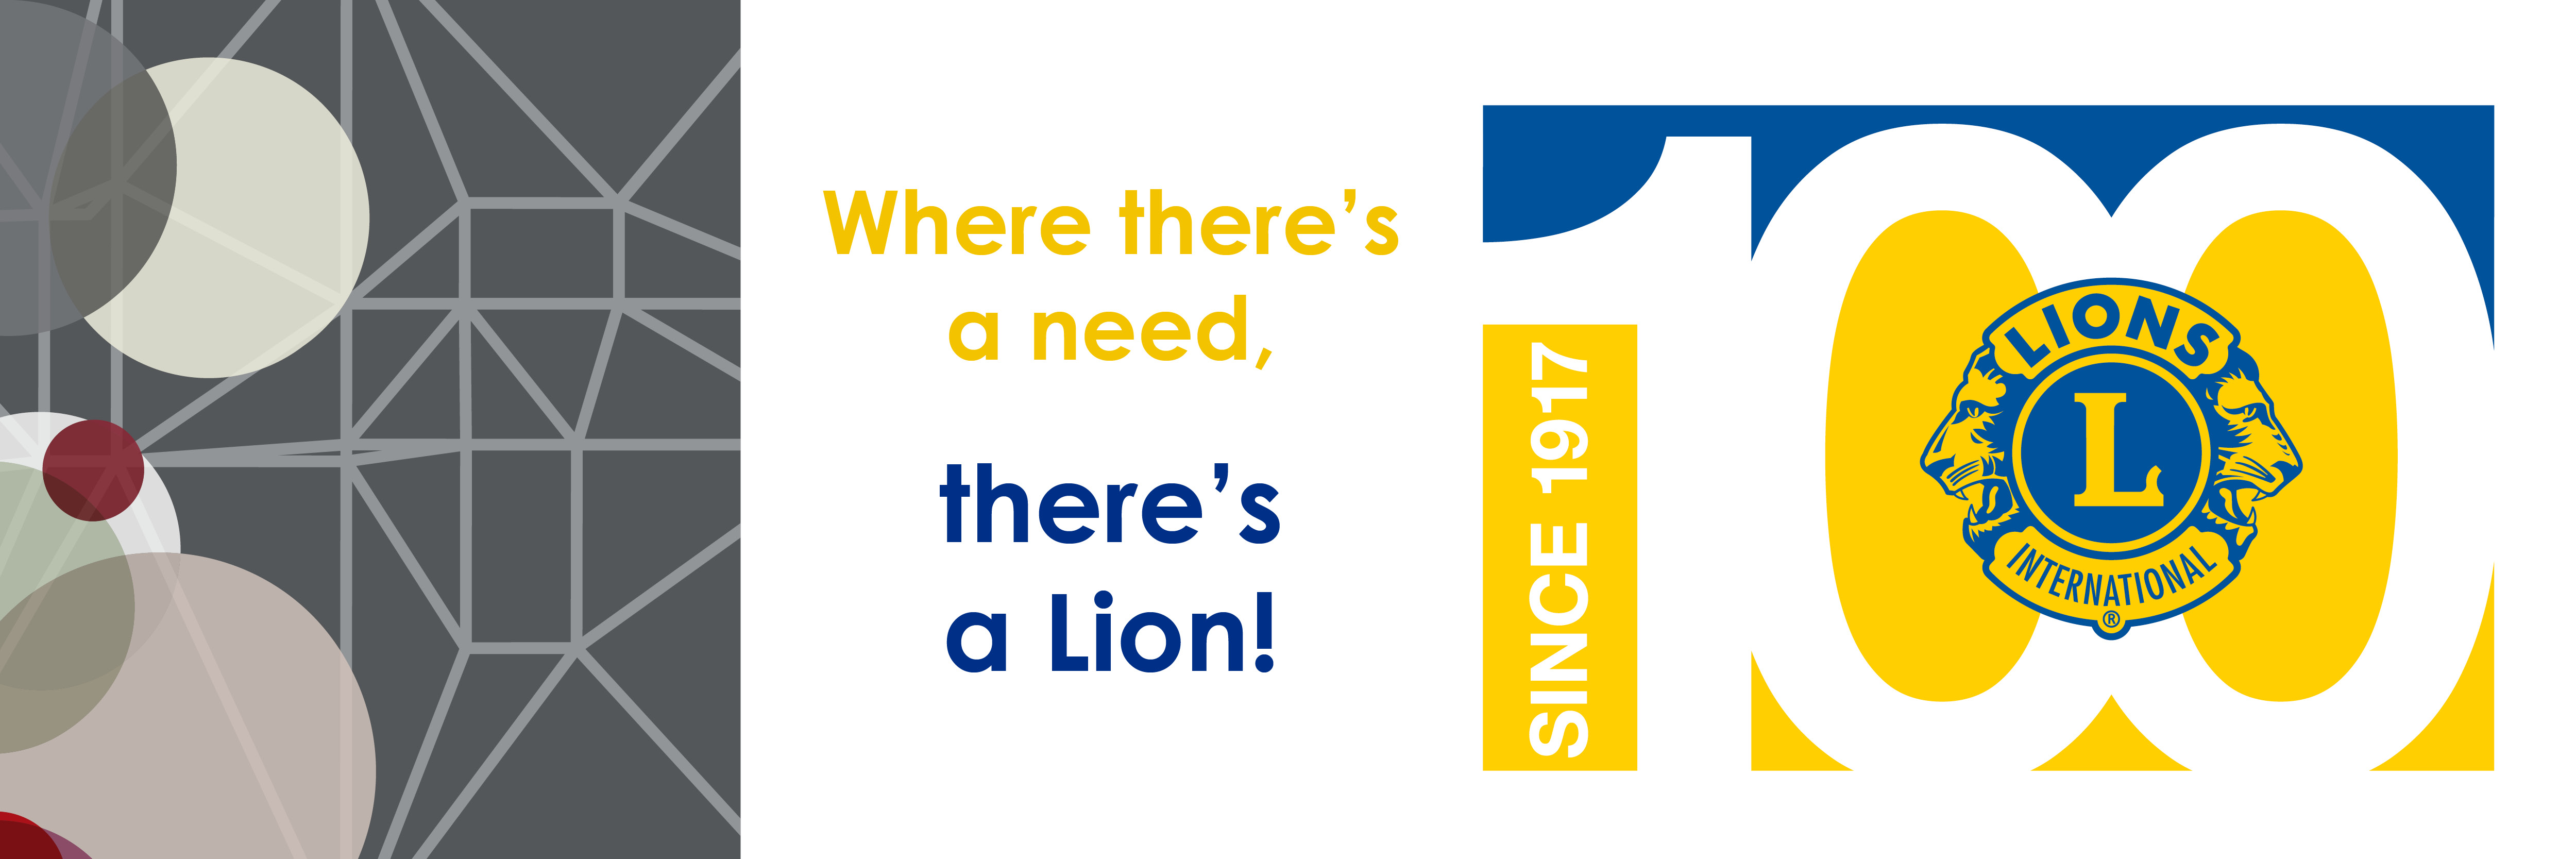 Lions Clubs International Centennial Logo - Where there's a need there's a Lion